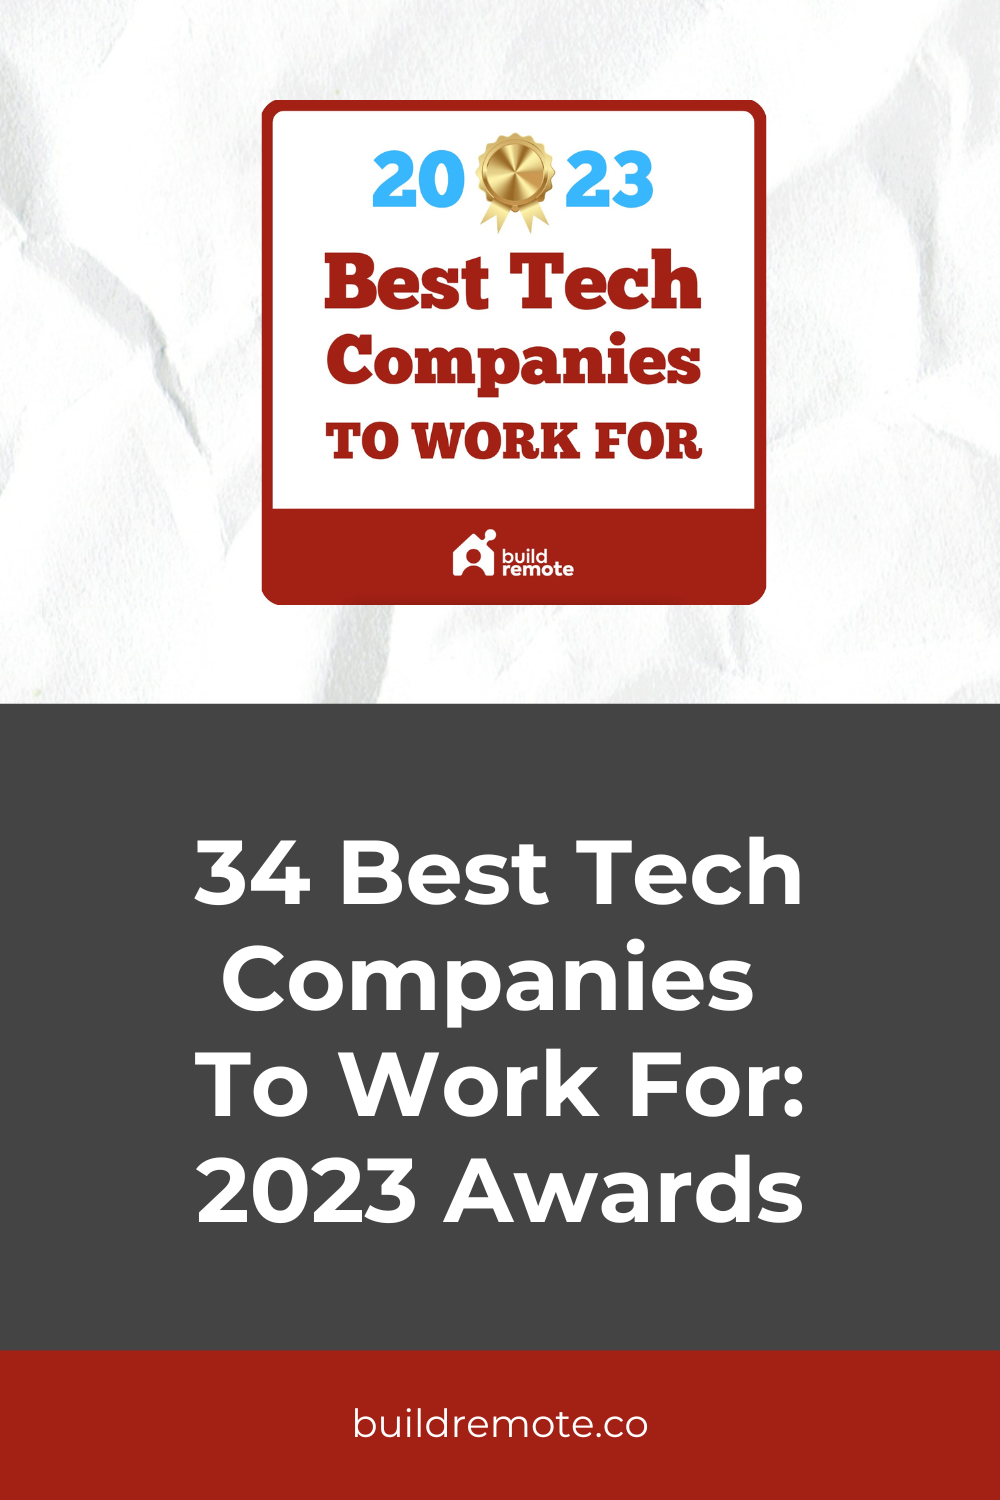 Pinterest Image - 34 Best Tech Companies To Work For: 2023 Awards